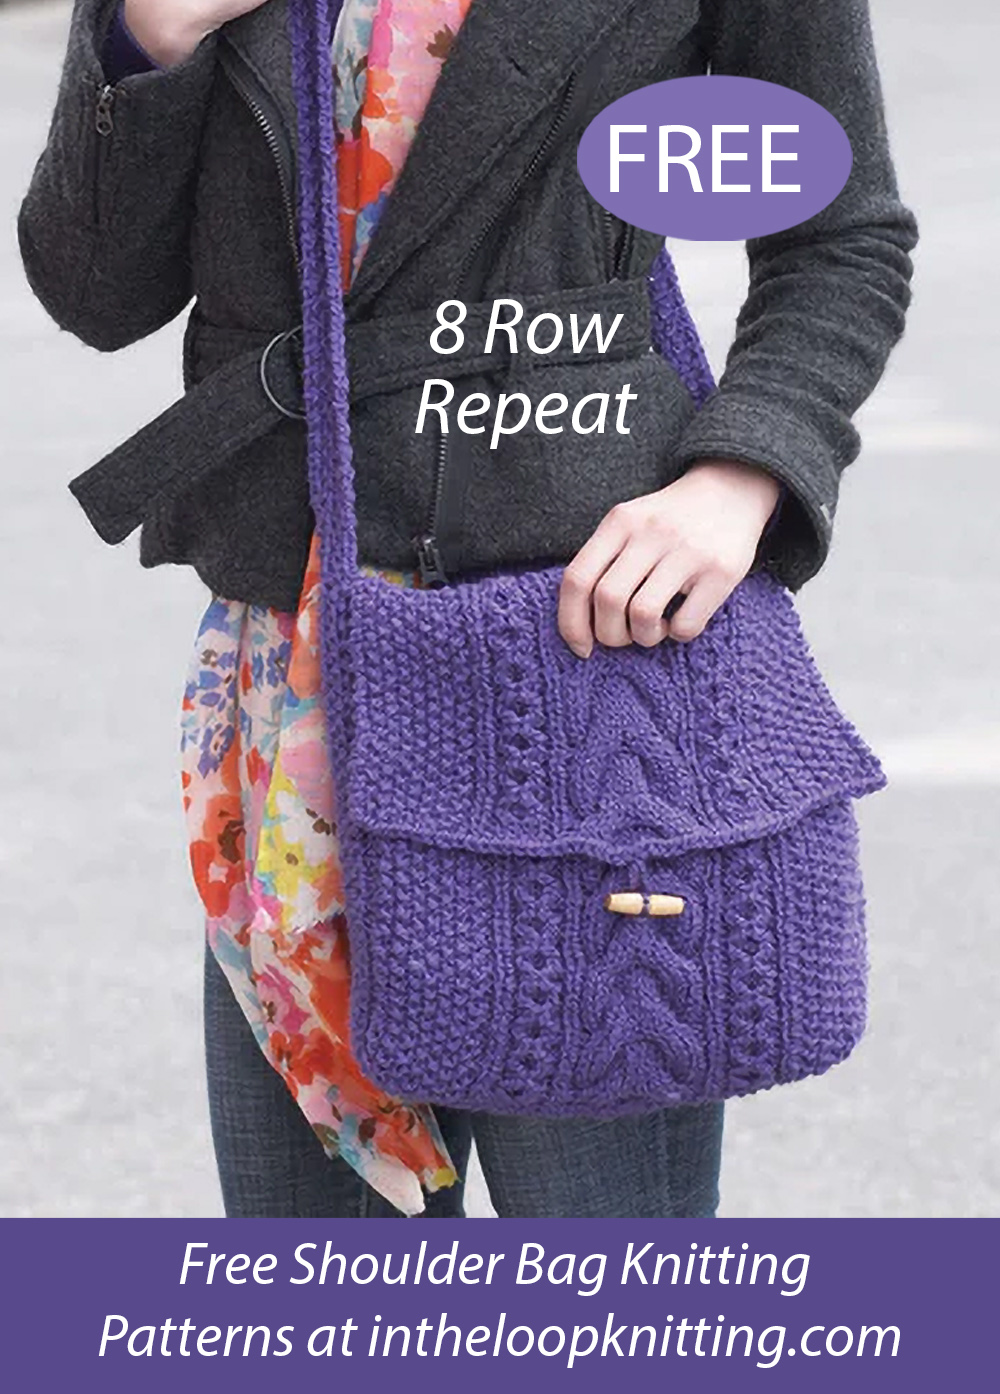 Free Seed Stitch and Cables Bag Knitting Pattern